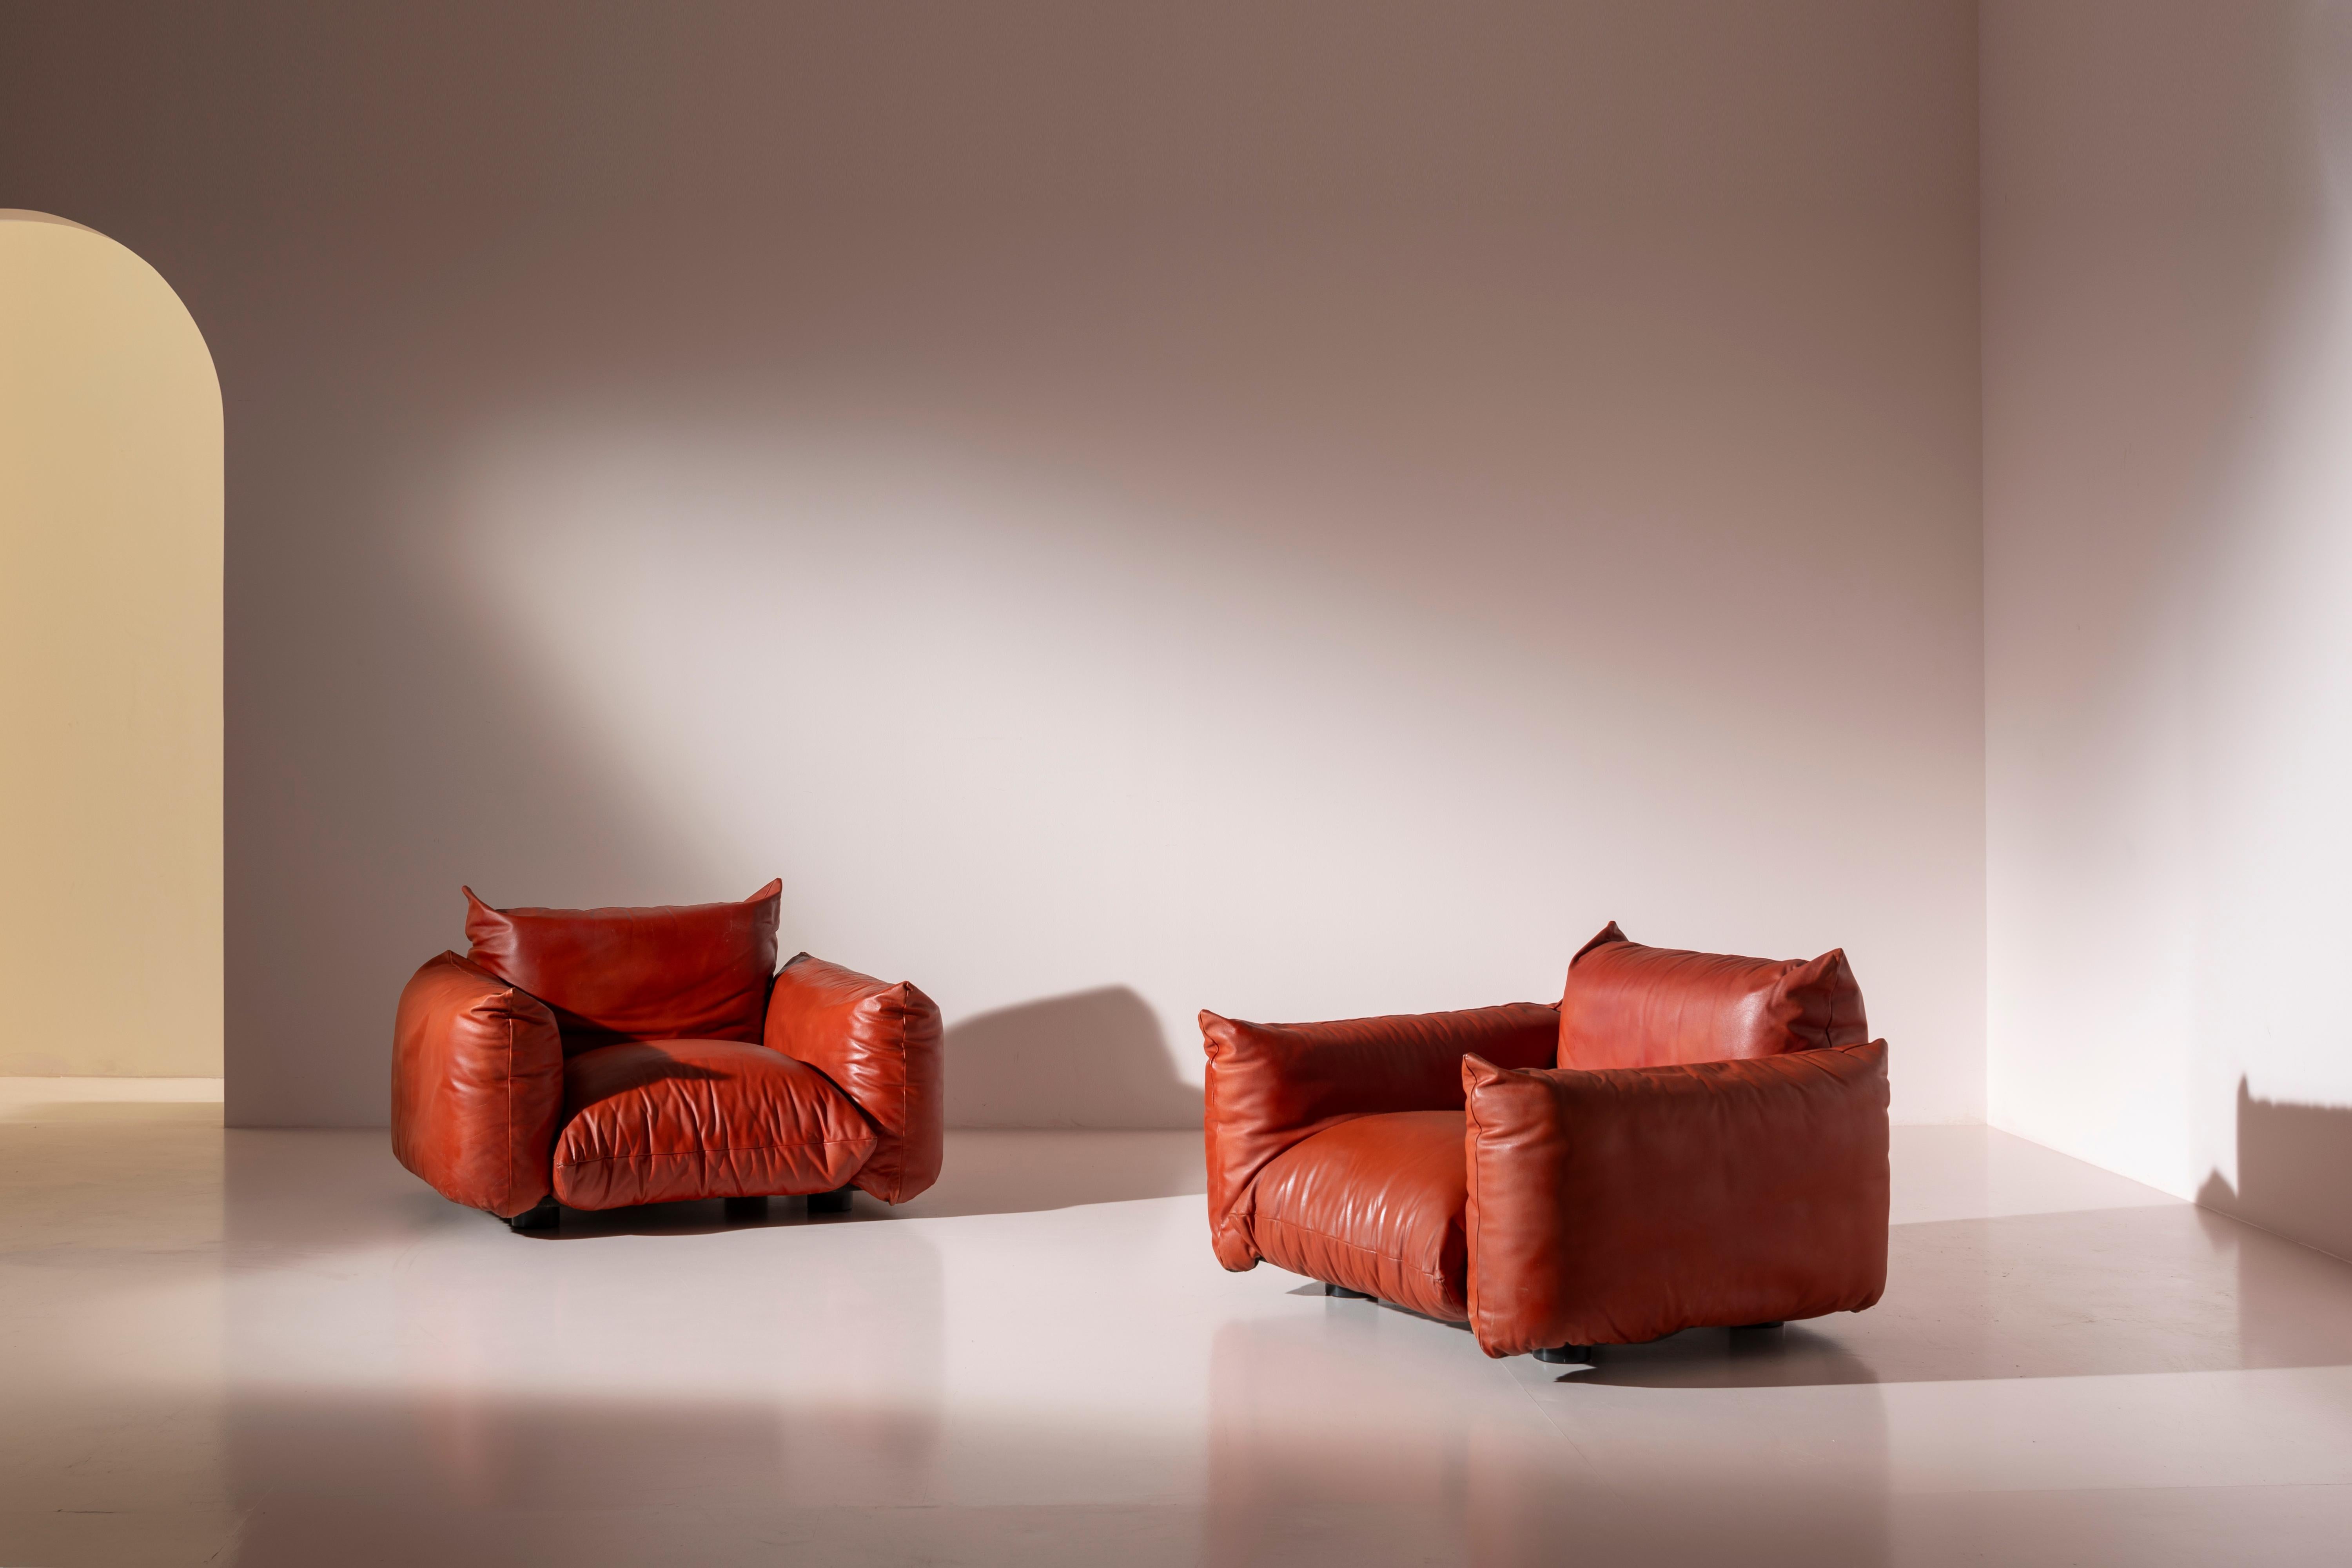 The first edition pair of Marenco leather lounge chairs by Arflex, originating from the 1970s, epitomize the ingenuity of Mario Marenco's design.

Debuting in 1970, these lounge chairs showcase a modular construction, comprising individual seat,